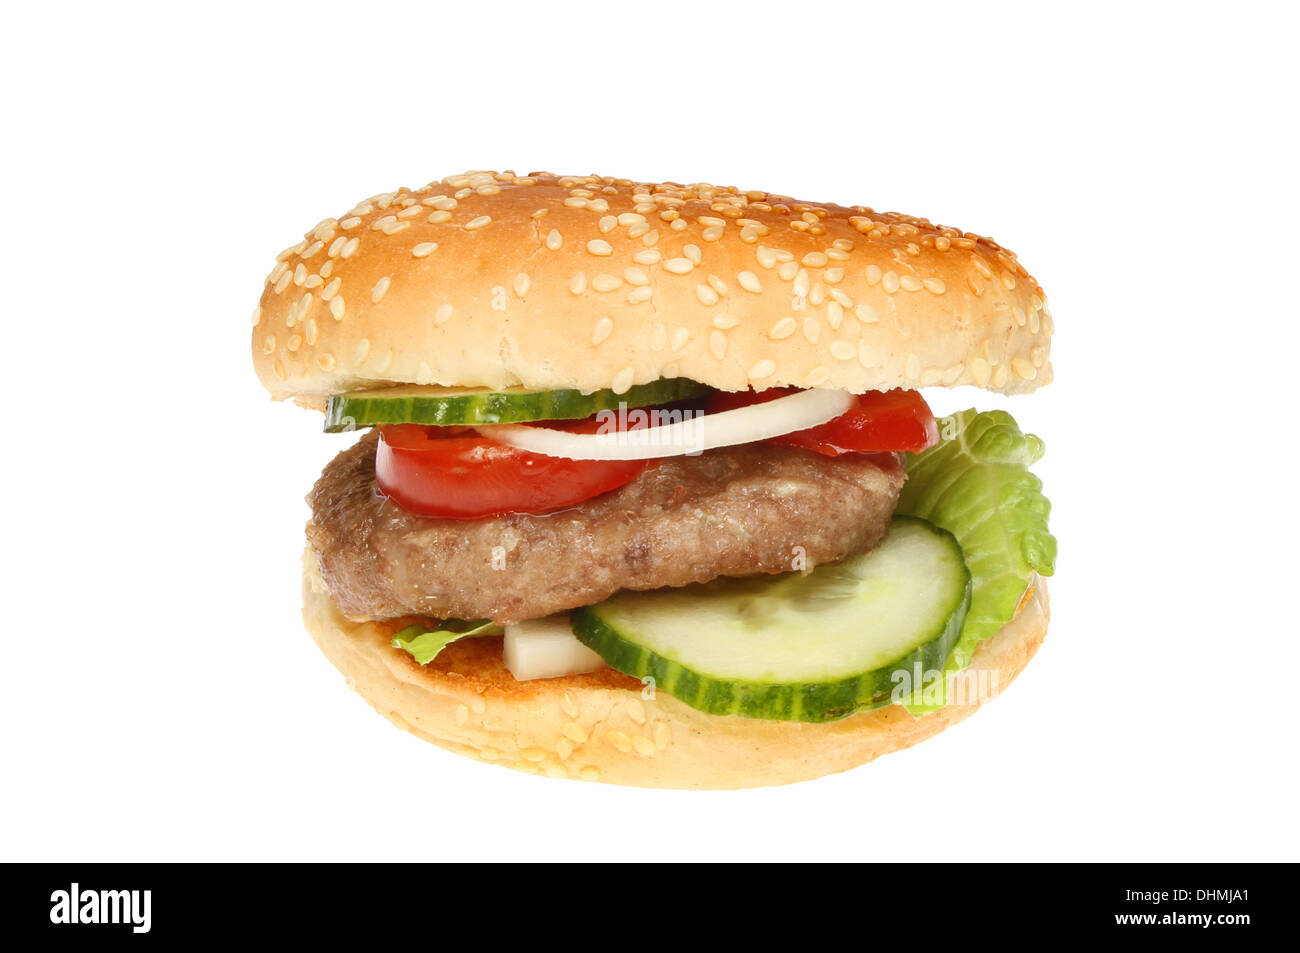 Burger with salad in a sesame seeded bun isolated against white Stock Photo